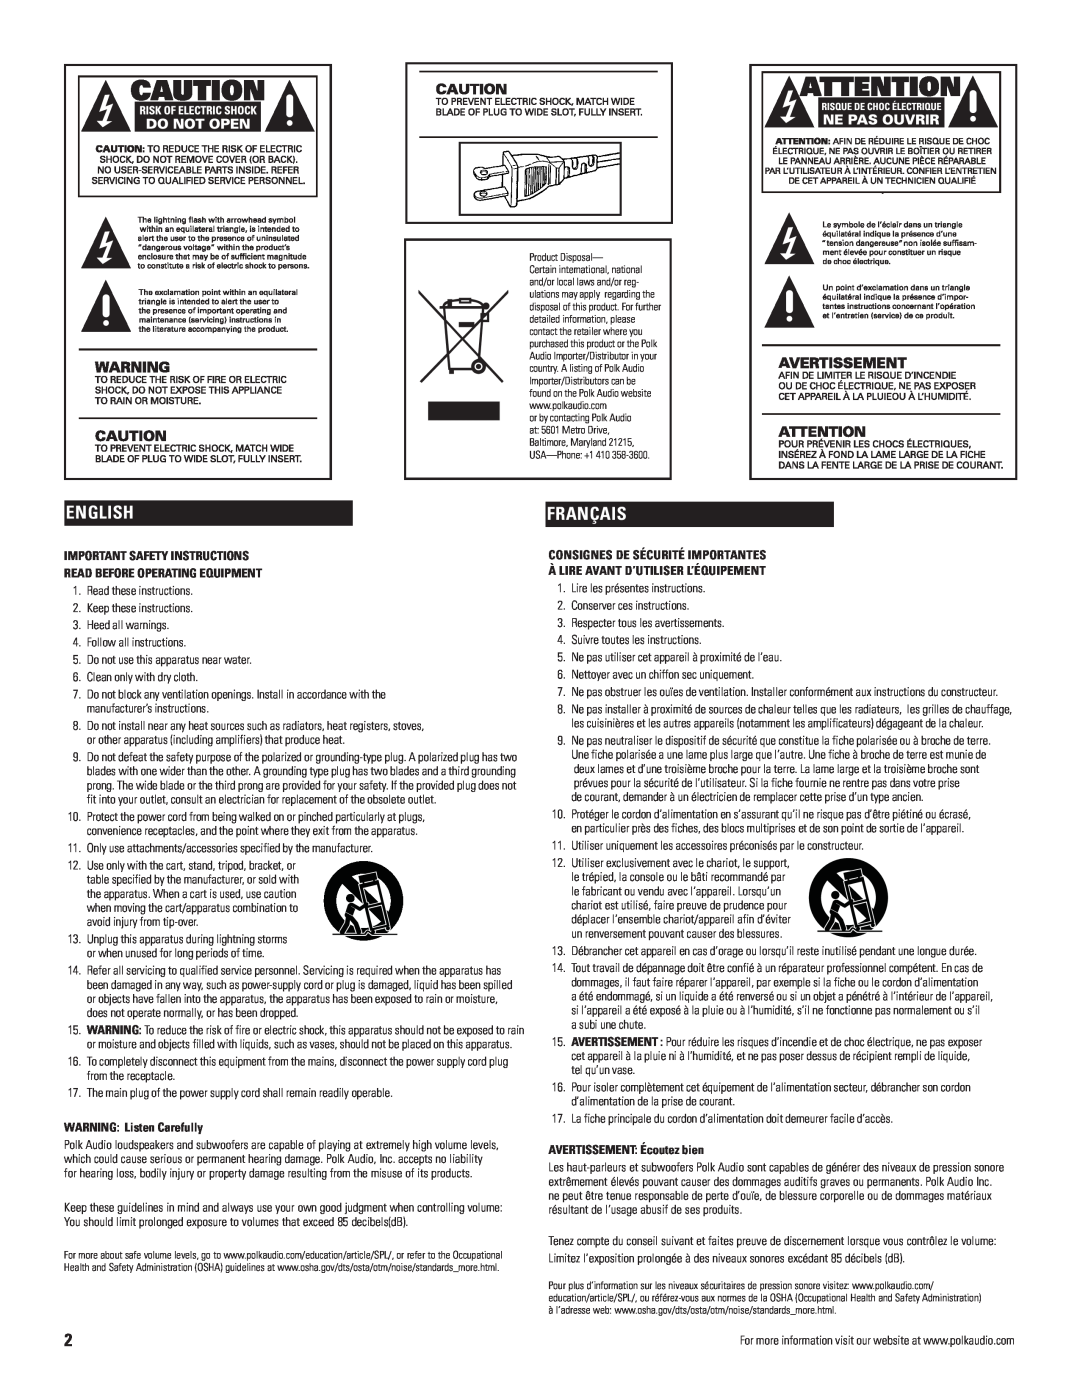 Polk Audio AM7775-B, AM9975-C4 Français, English, Important Safety Instructions, Read Before Operating Equipment 